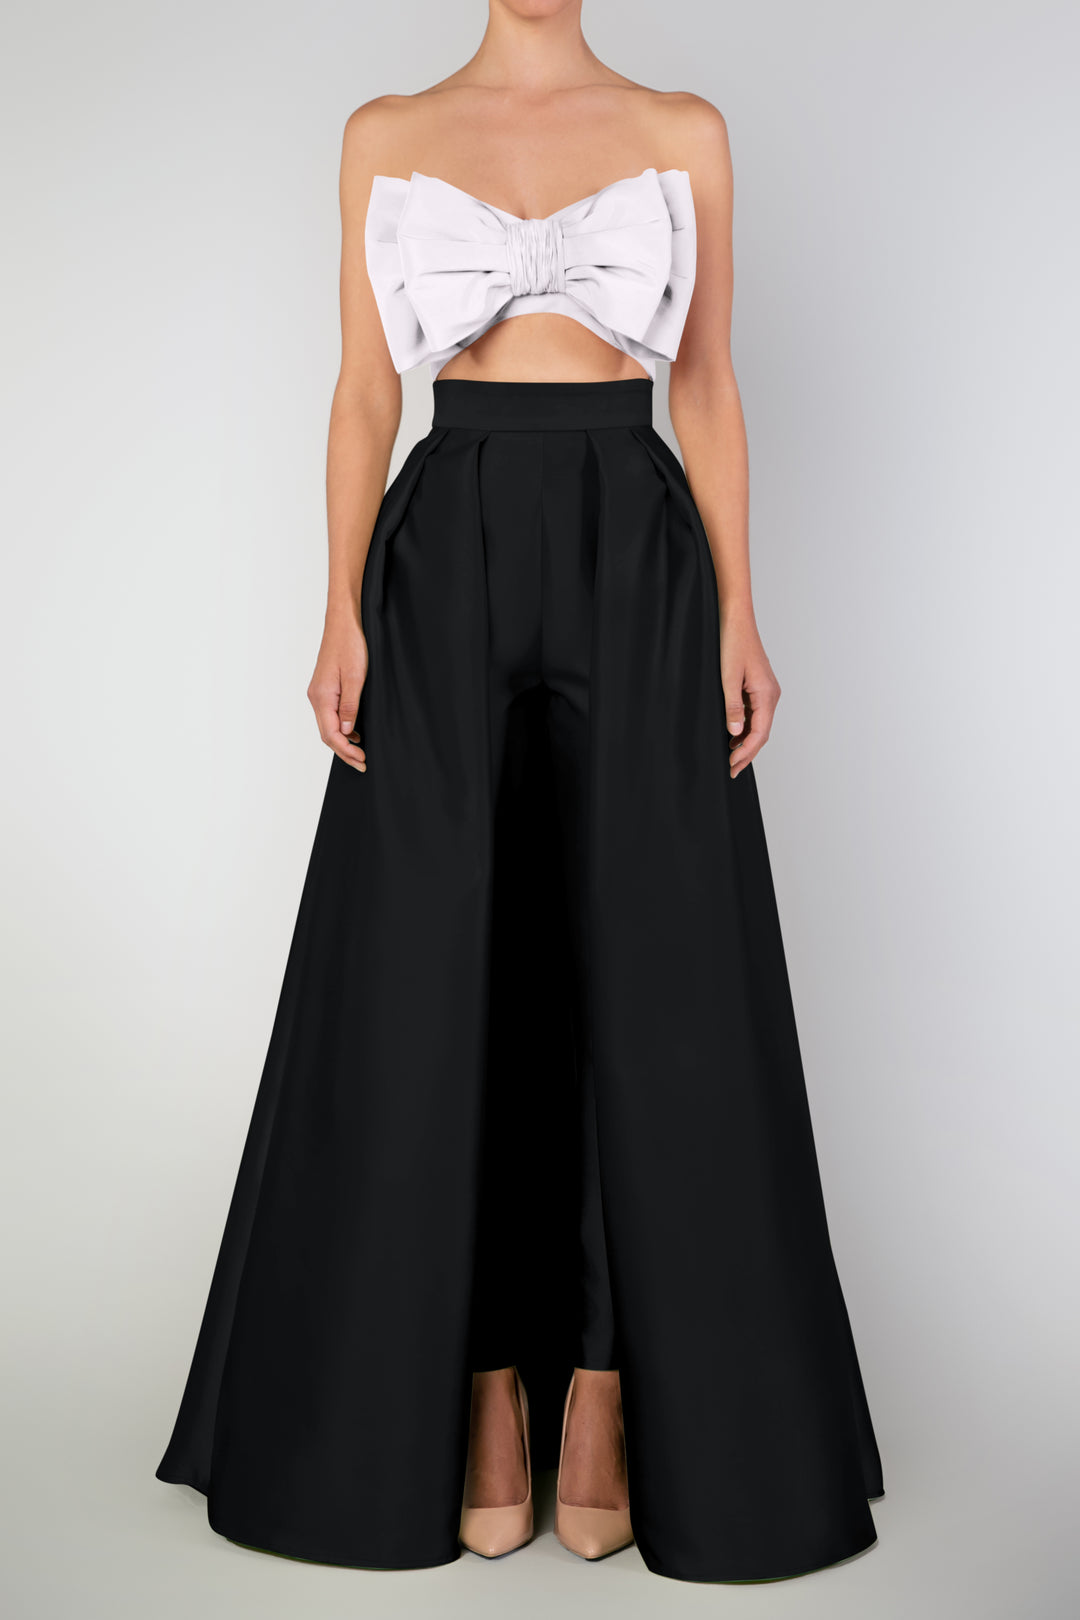 Black Wool Blend High Waisted Cigarette Trousers